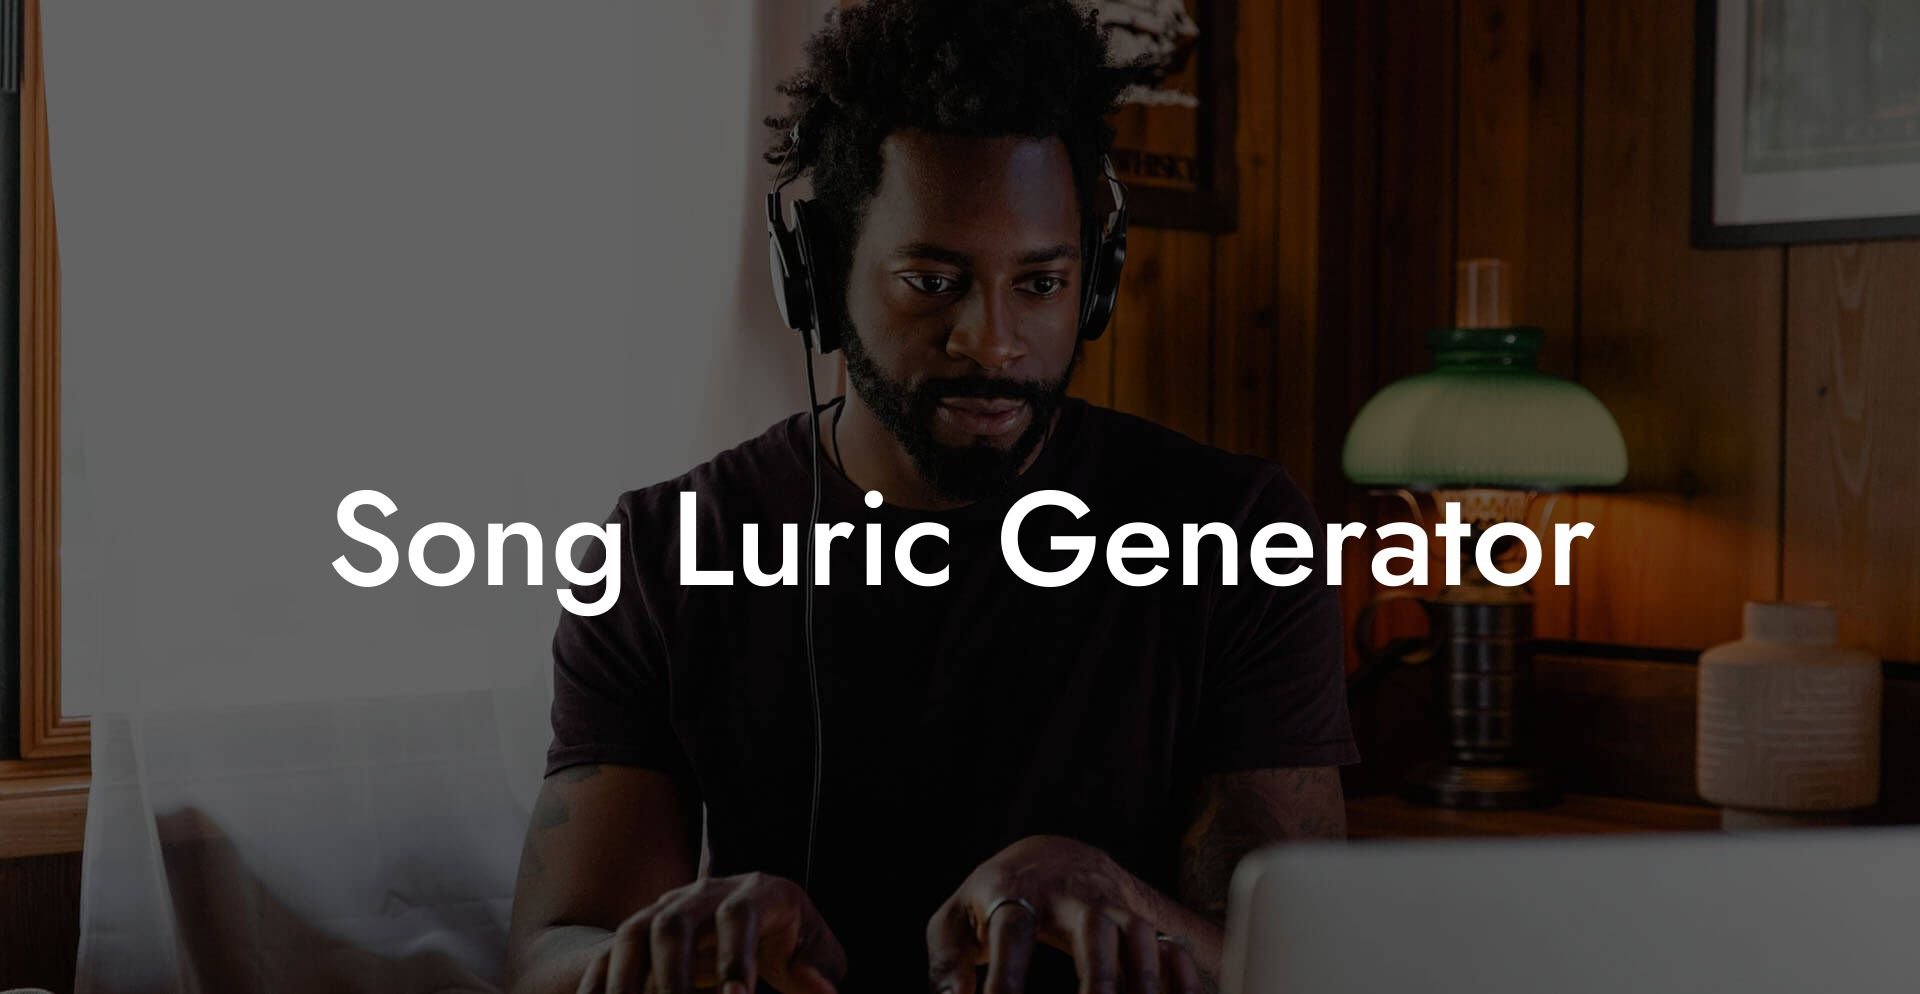 song luric generator lyric assistant